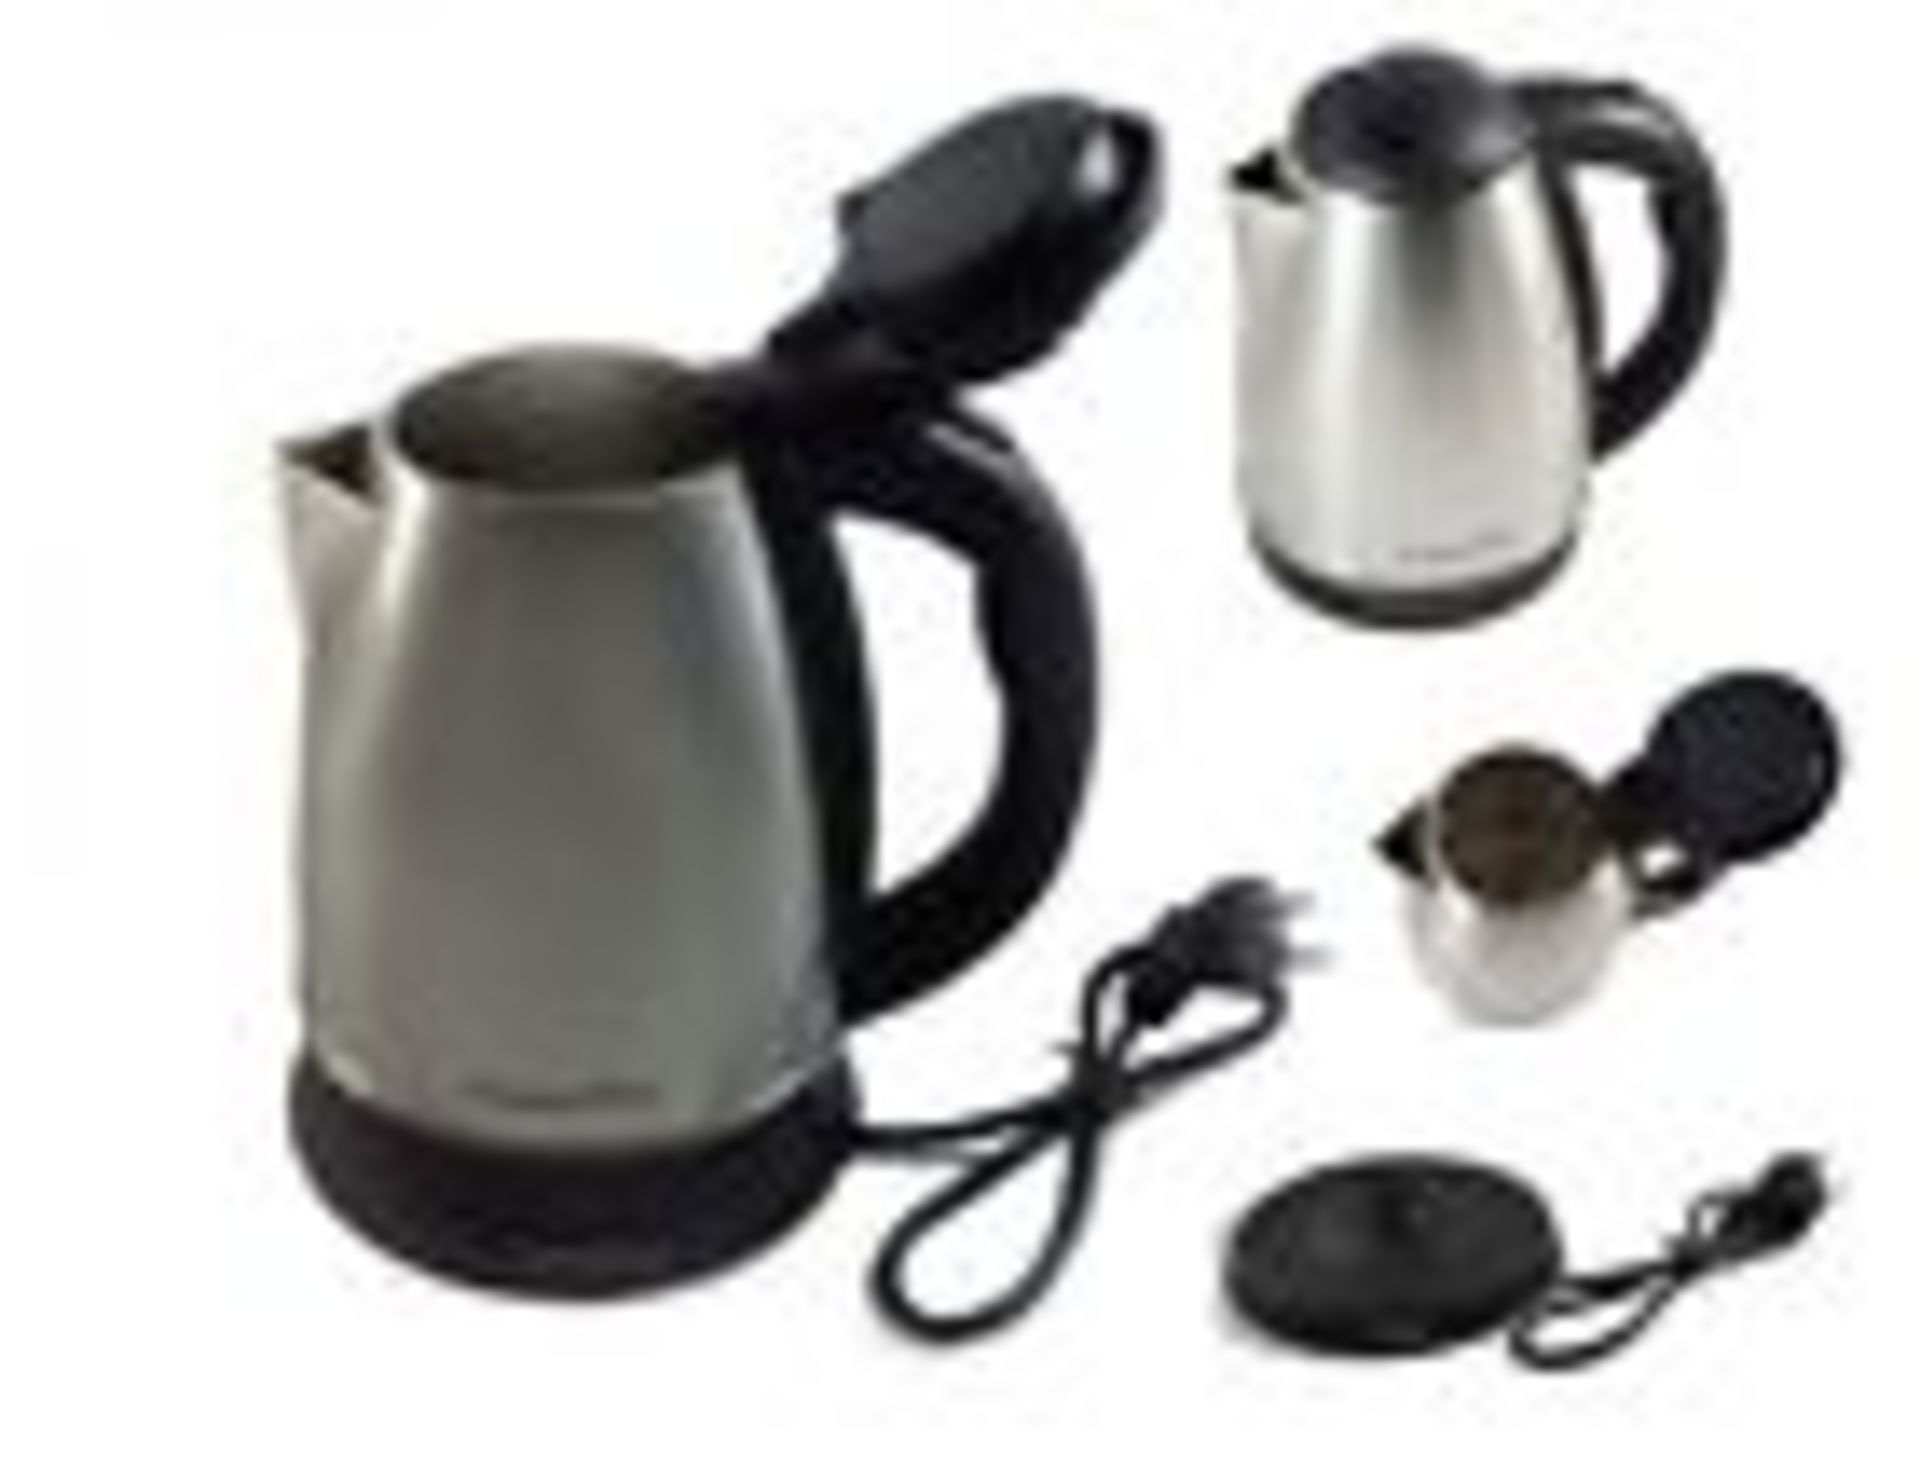 V Brand New High Quality 1.8 litre Stainless Steel Water Kettle With Cord Storage And Rotating